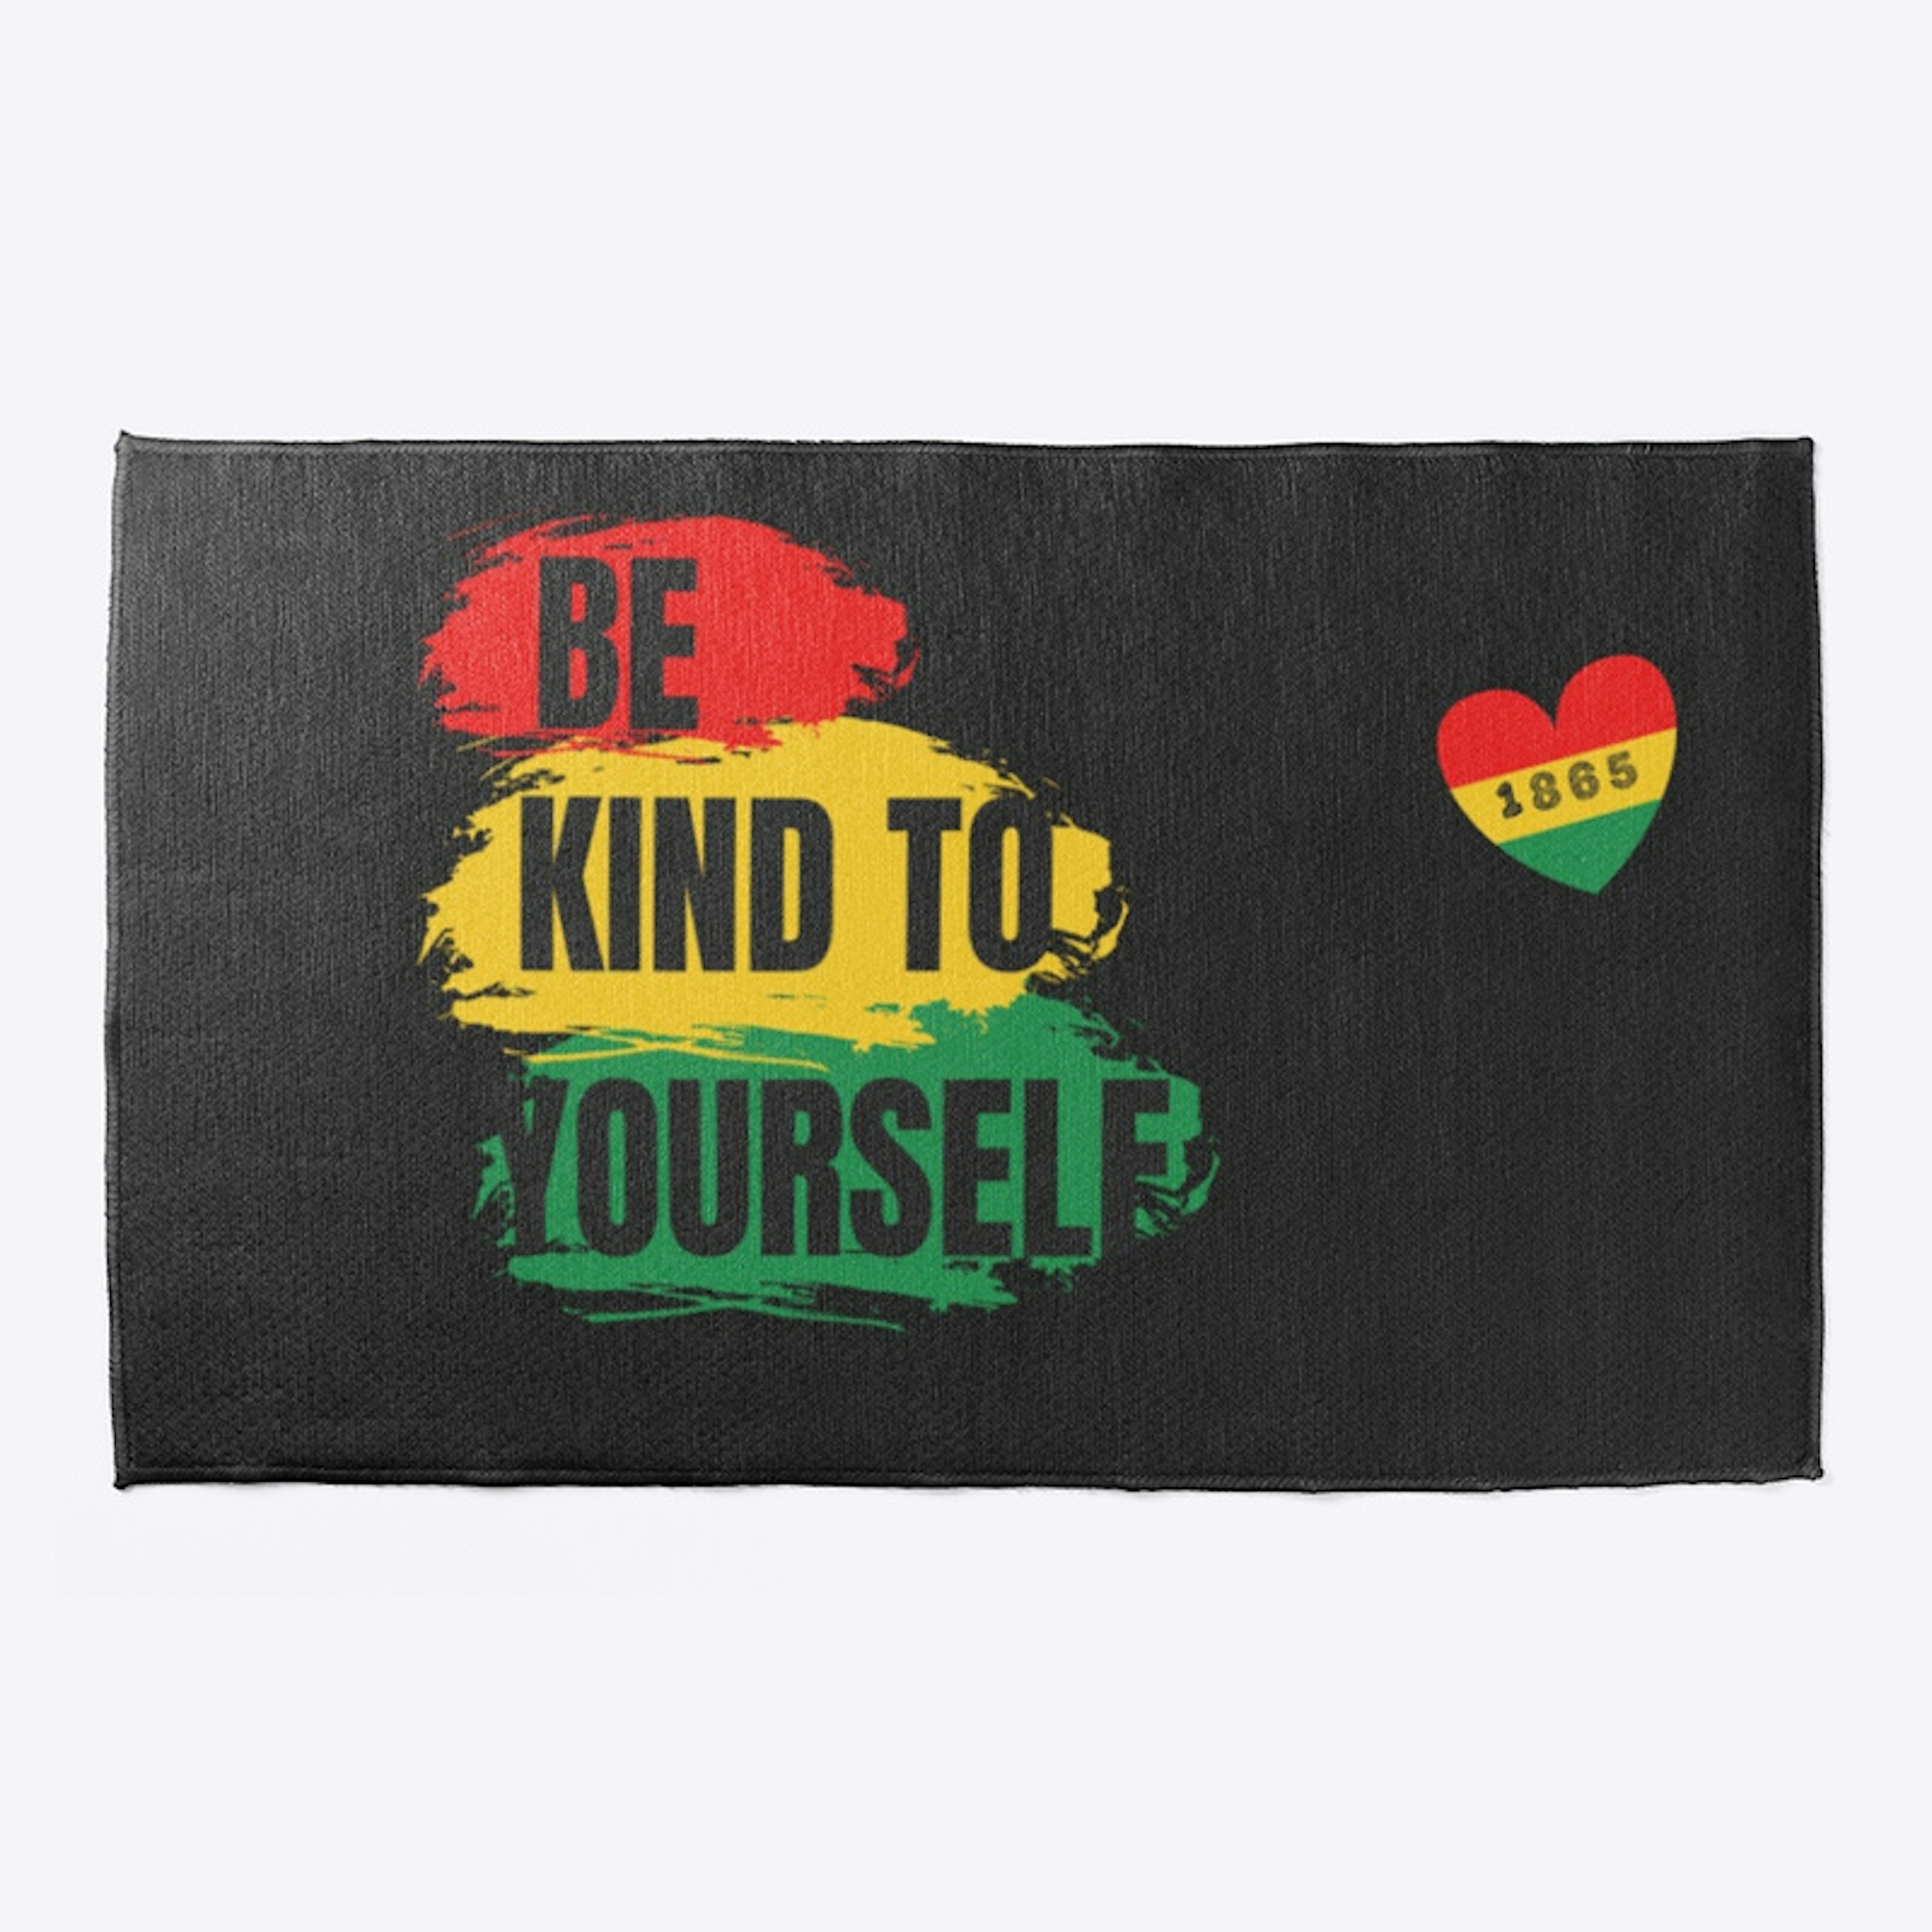 Be Kind to yourself (Limited Edition) 